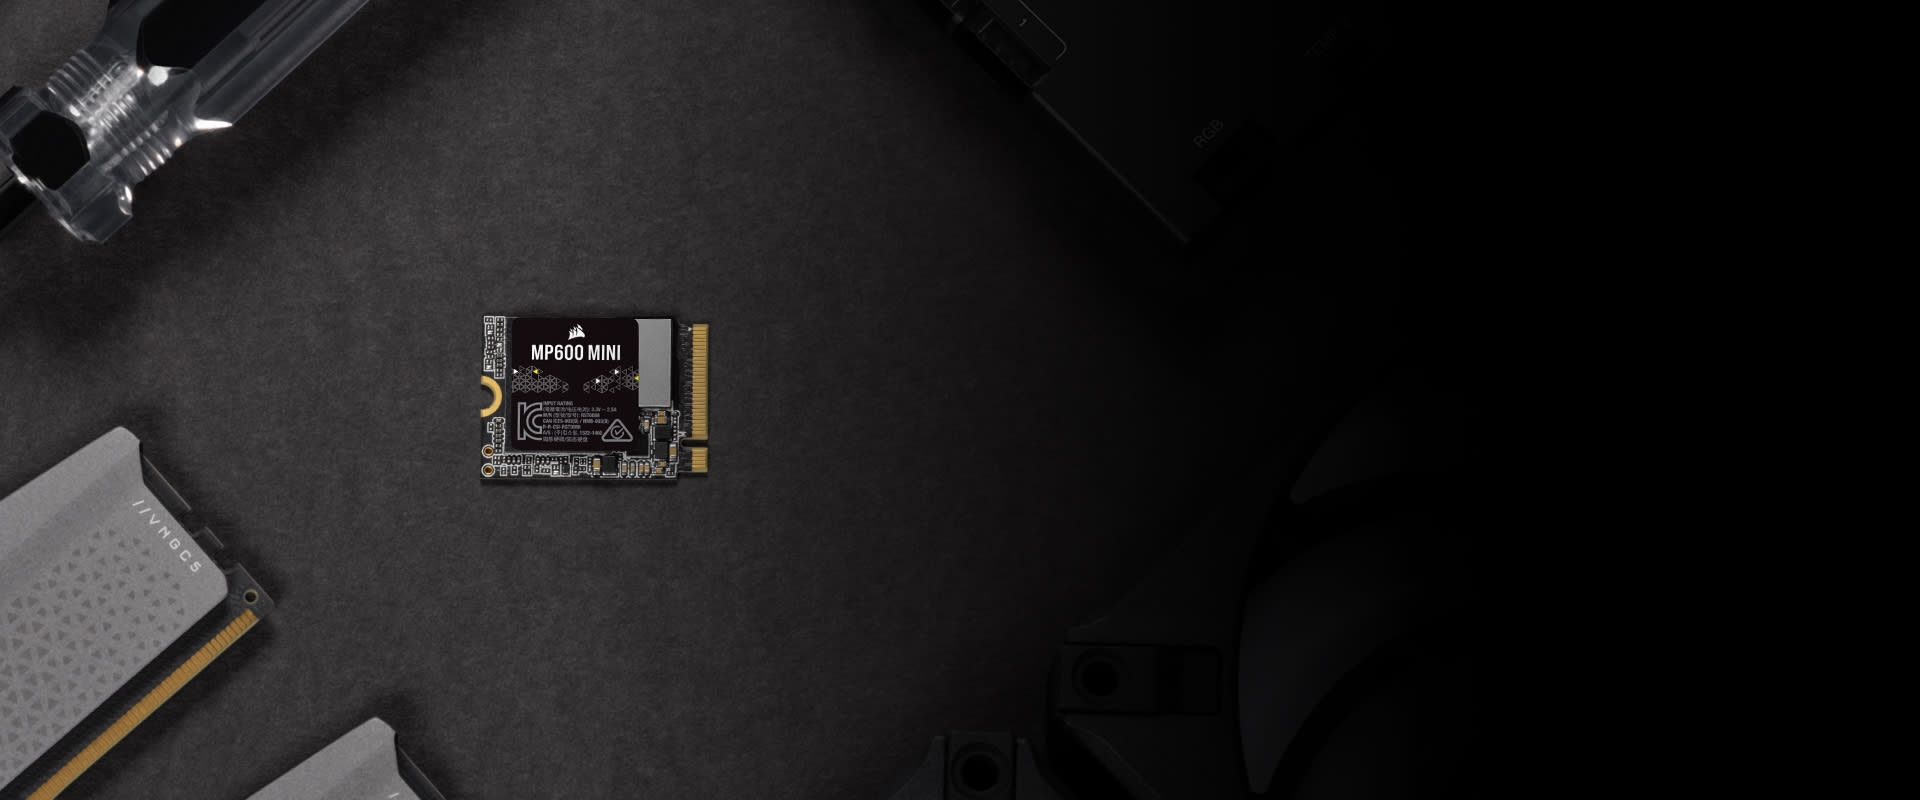 Corsair's $110 1 TB MP600 Mini SSD is a great fit for any Steam Deck -  Polygon